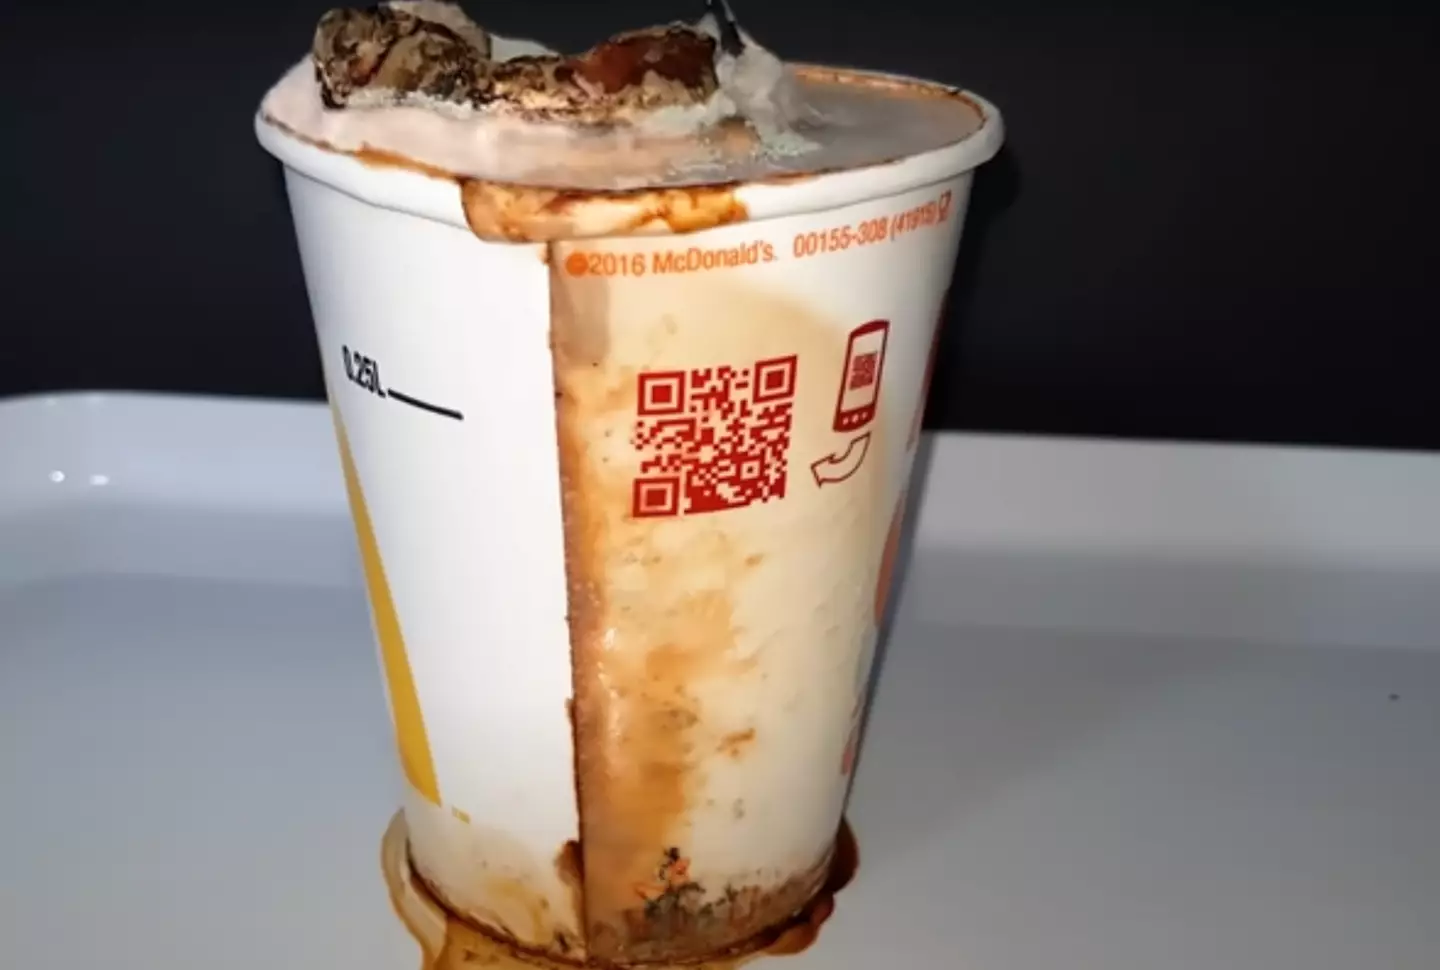 Explaining the experiment, the video caption read: “Have you ever wondered how long your drink can last in a McDonald's paper cup?  Me too."(PhotoOwl via YouTube)